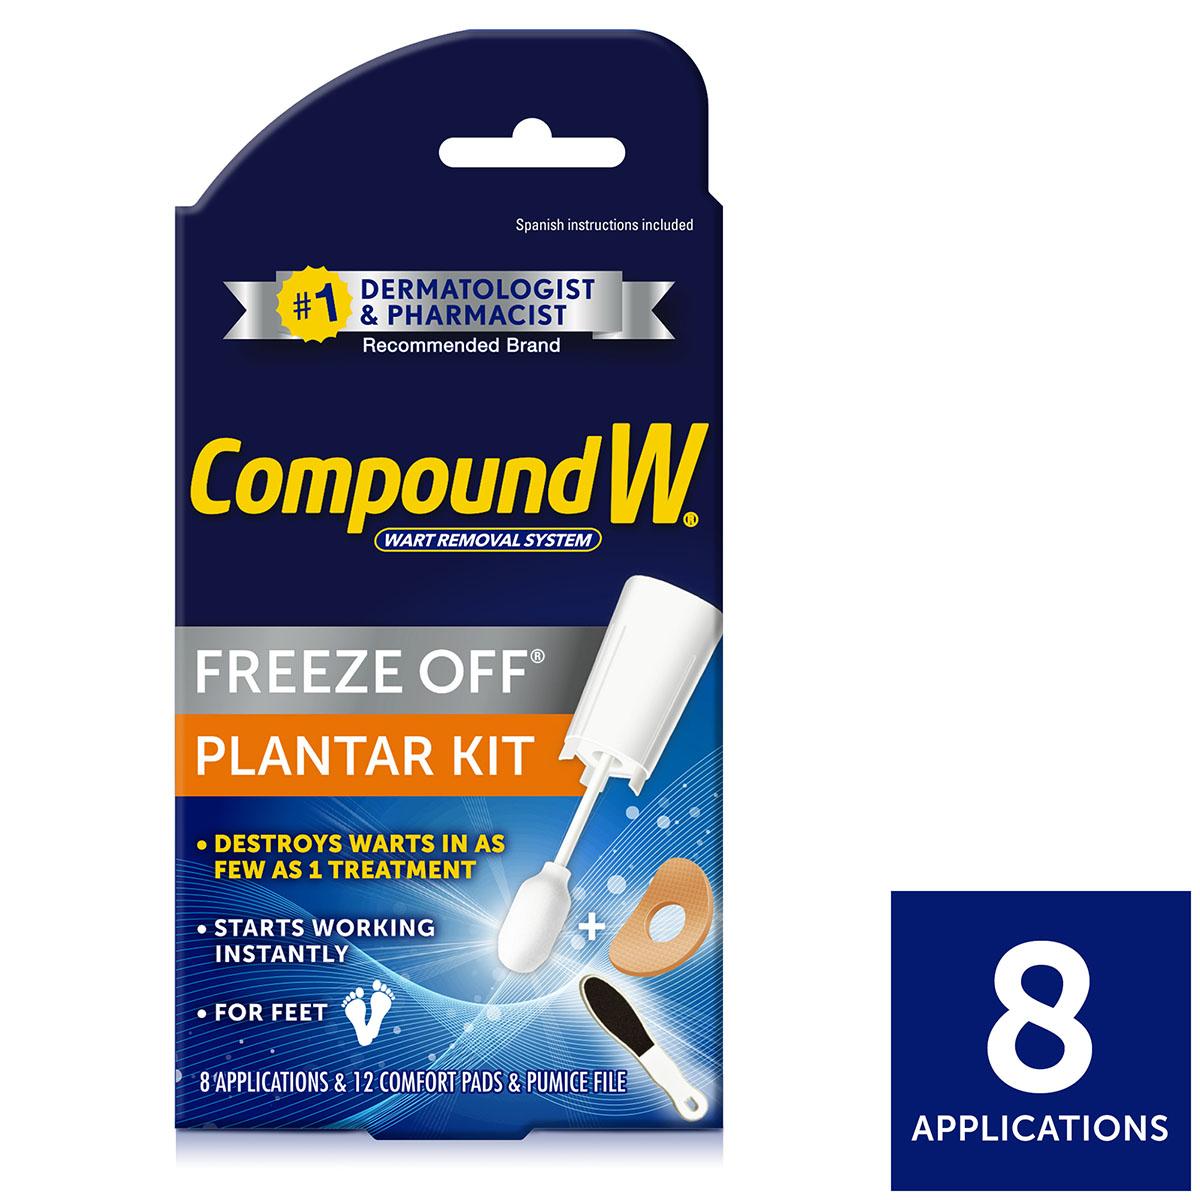 Compound W Freeze Off Plantar Wart Remover Kit for $6.33